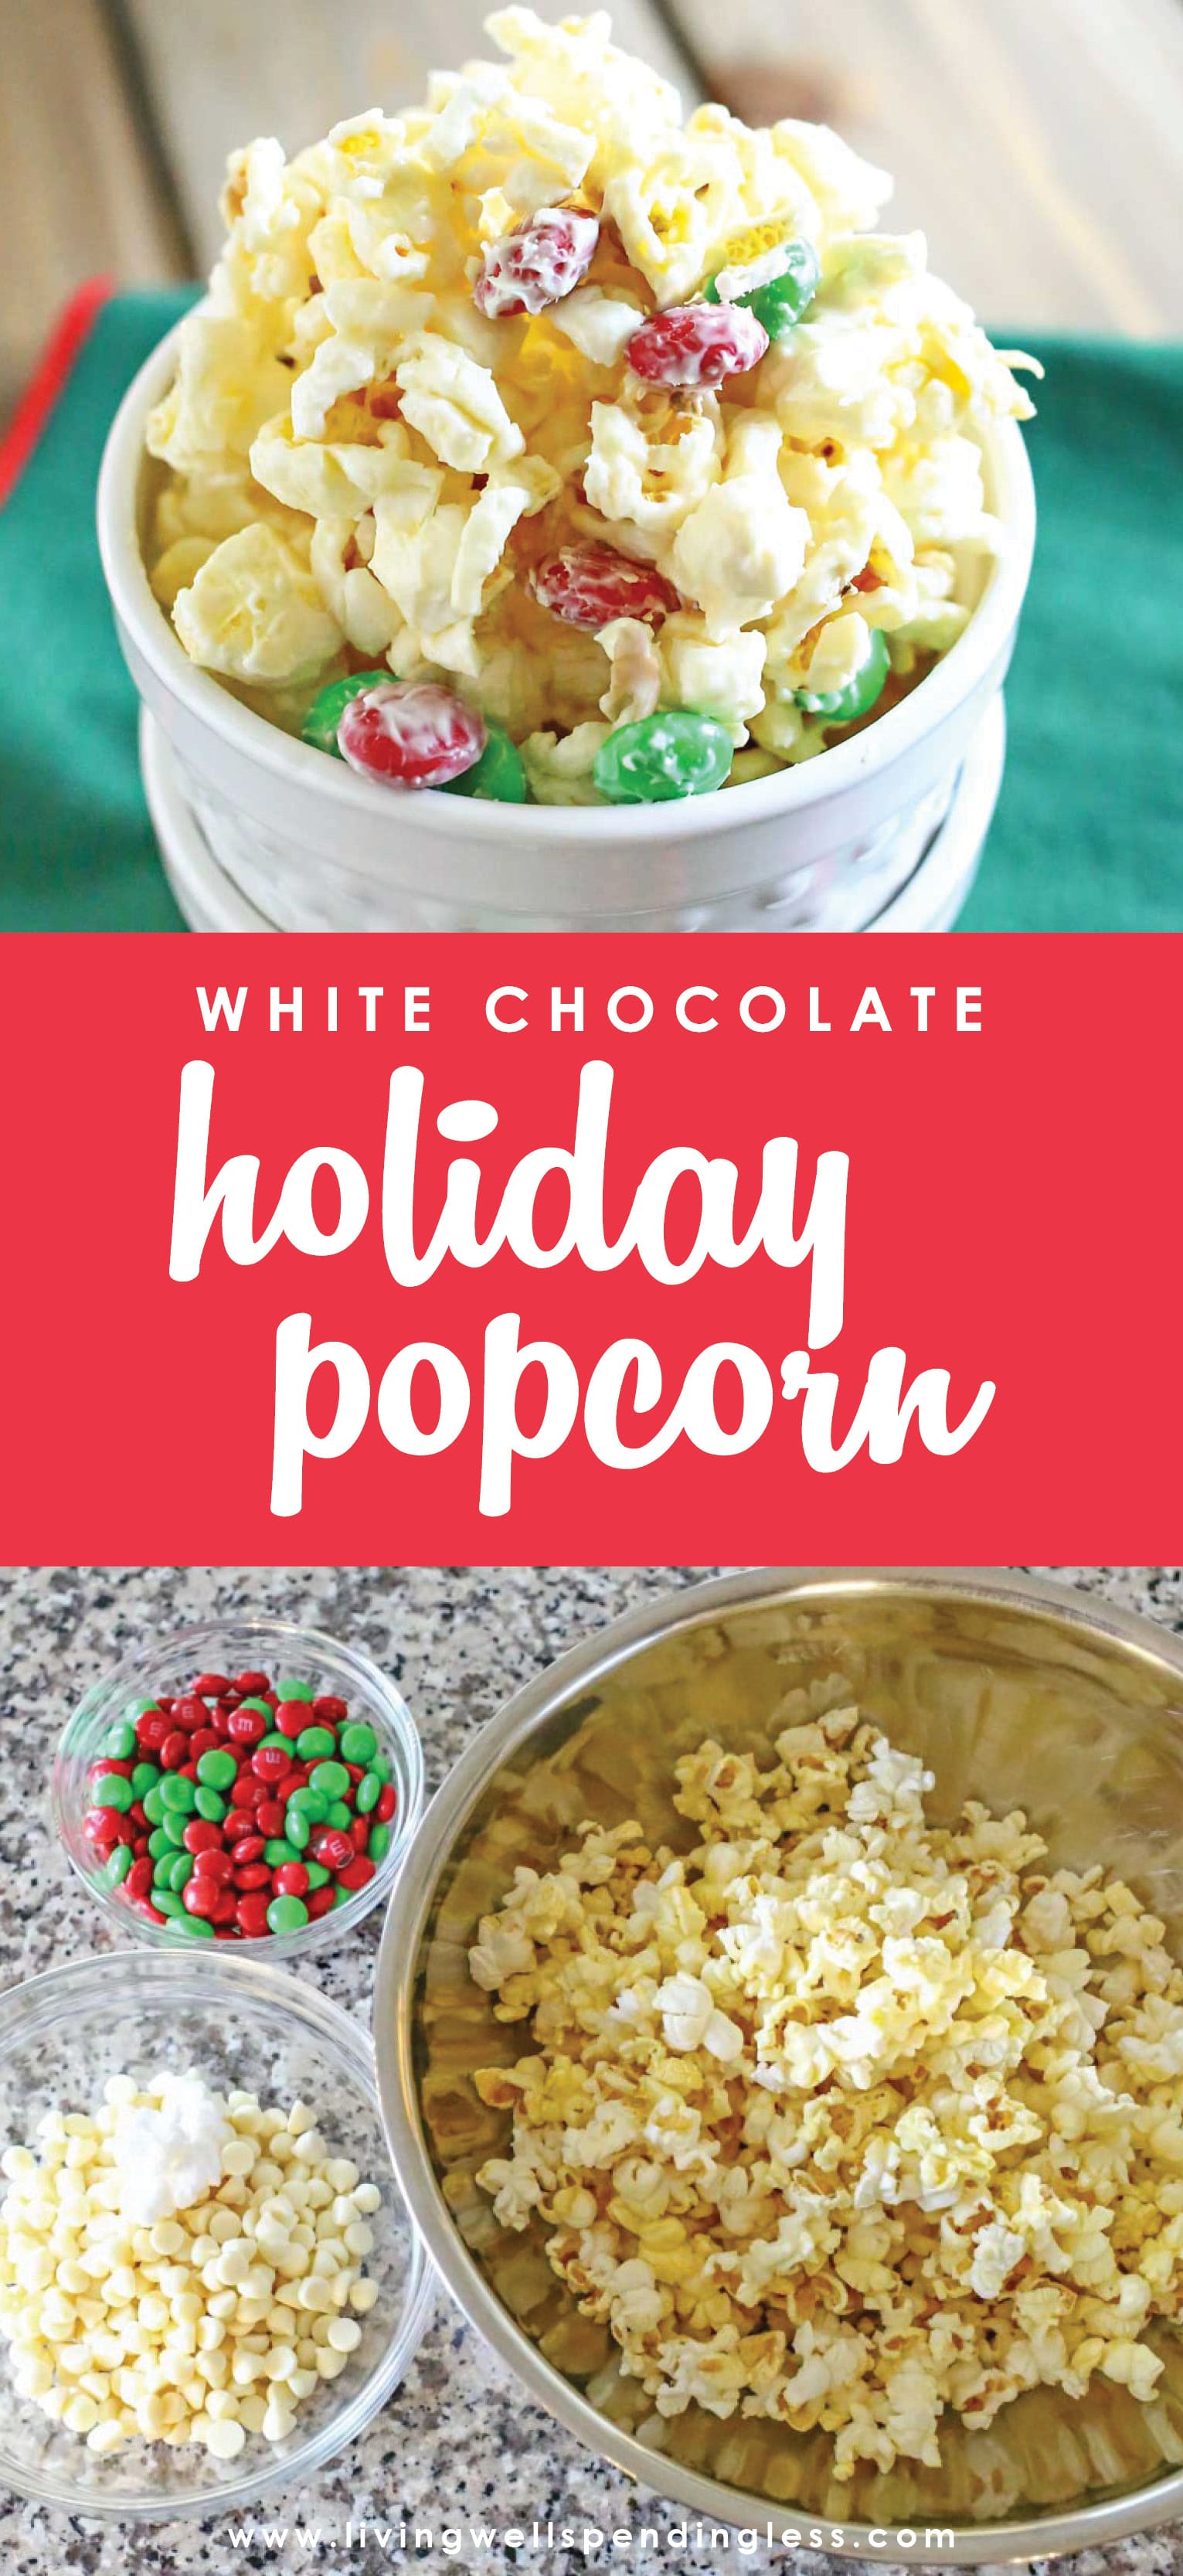 White Chocolate Holiday Popcorn | Living Well Spending Less®